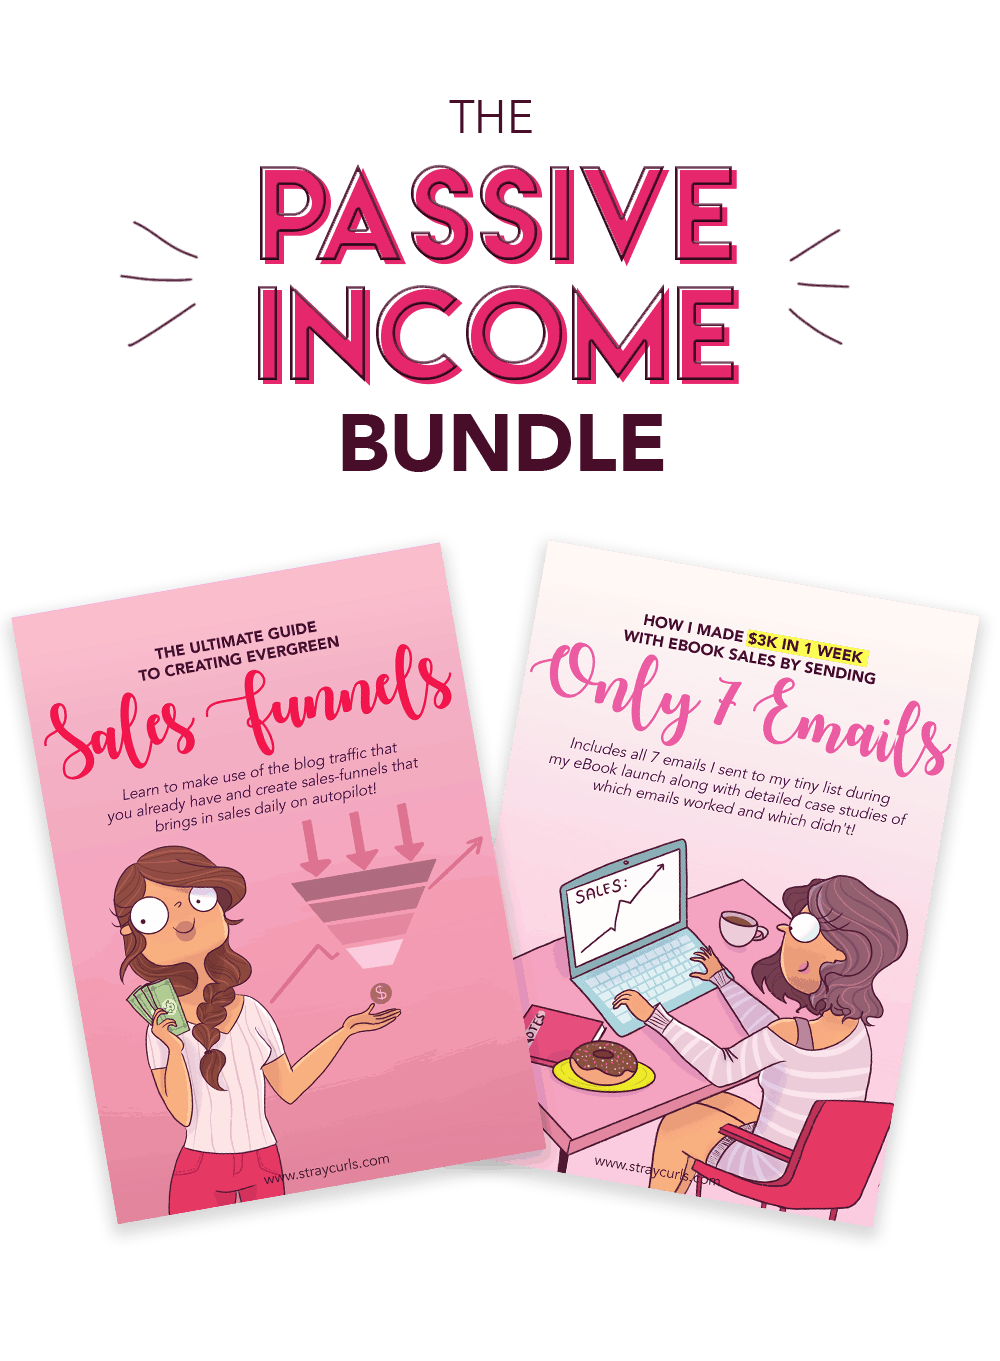 The Passive Income Bundle will help you boost your blog income by teaching you how to launch your digital products and creating evergreen sales funnels.